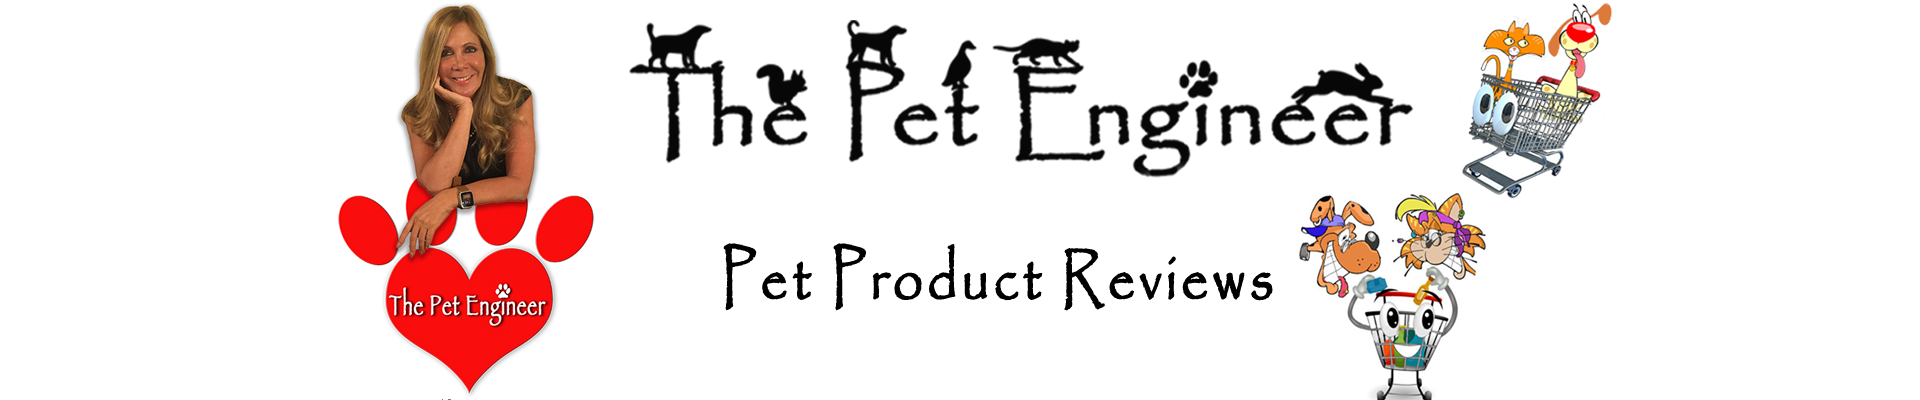 The Pet Product Reviews